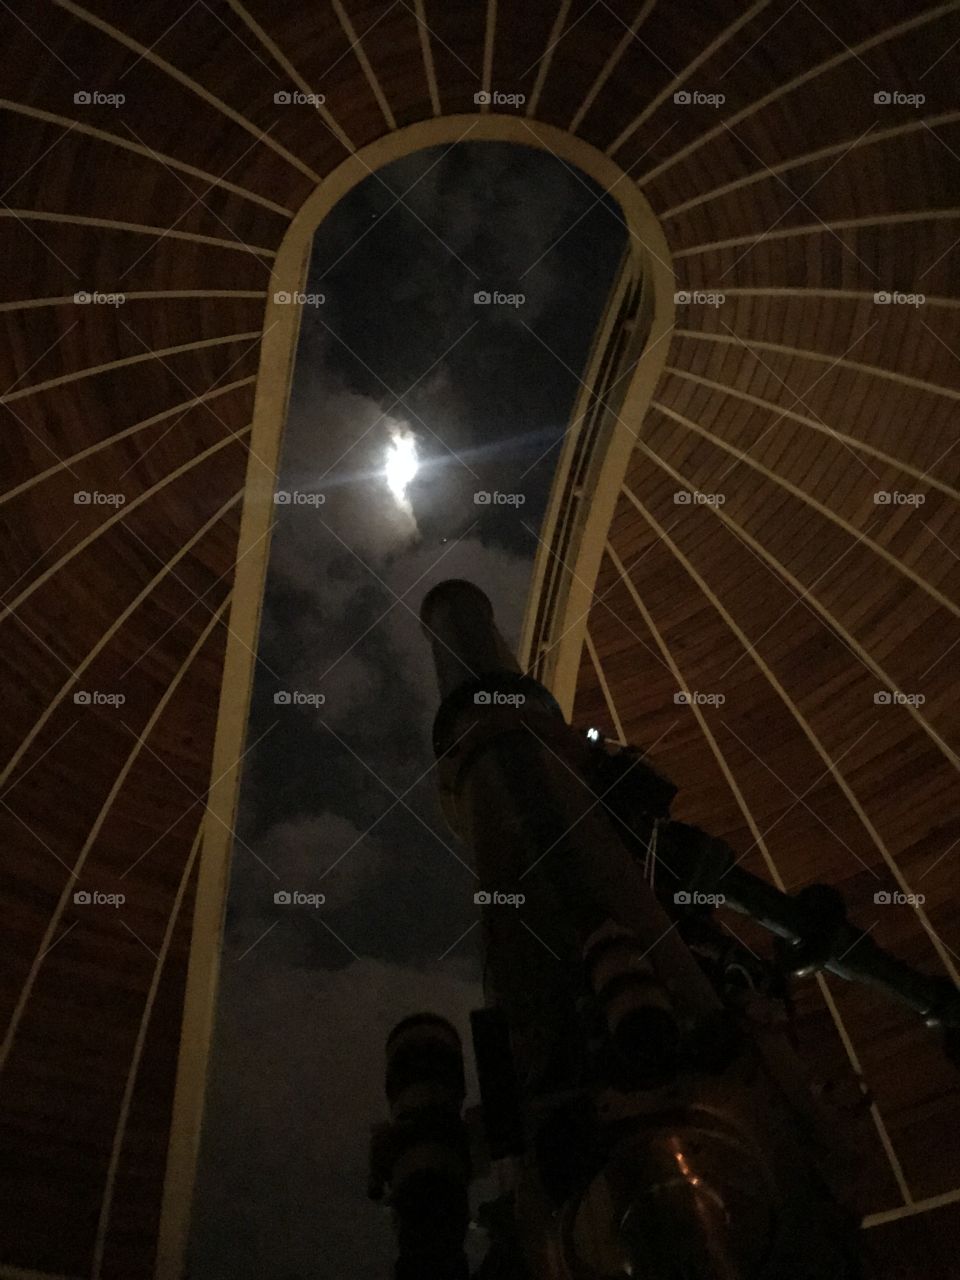 Arcetri observatory telescope looking out at the beautiful moon.